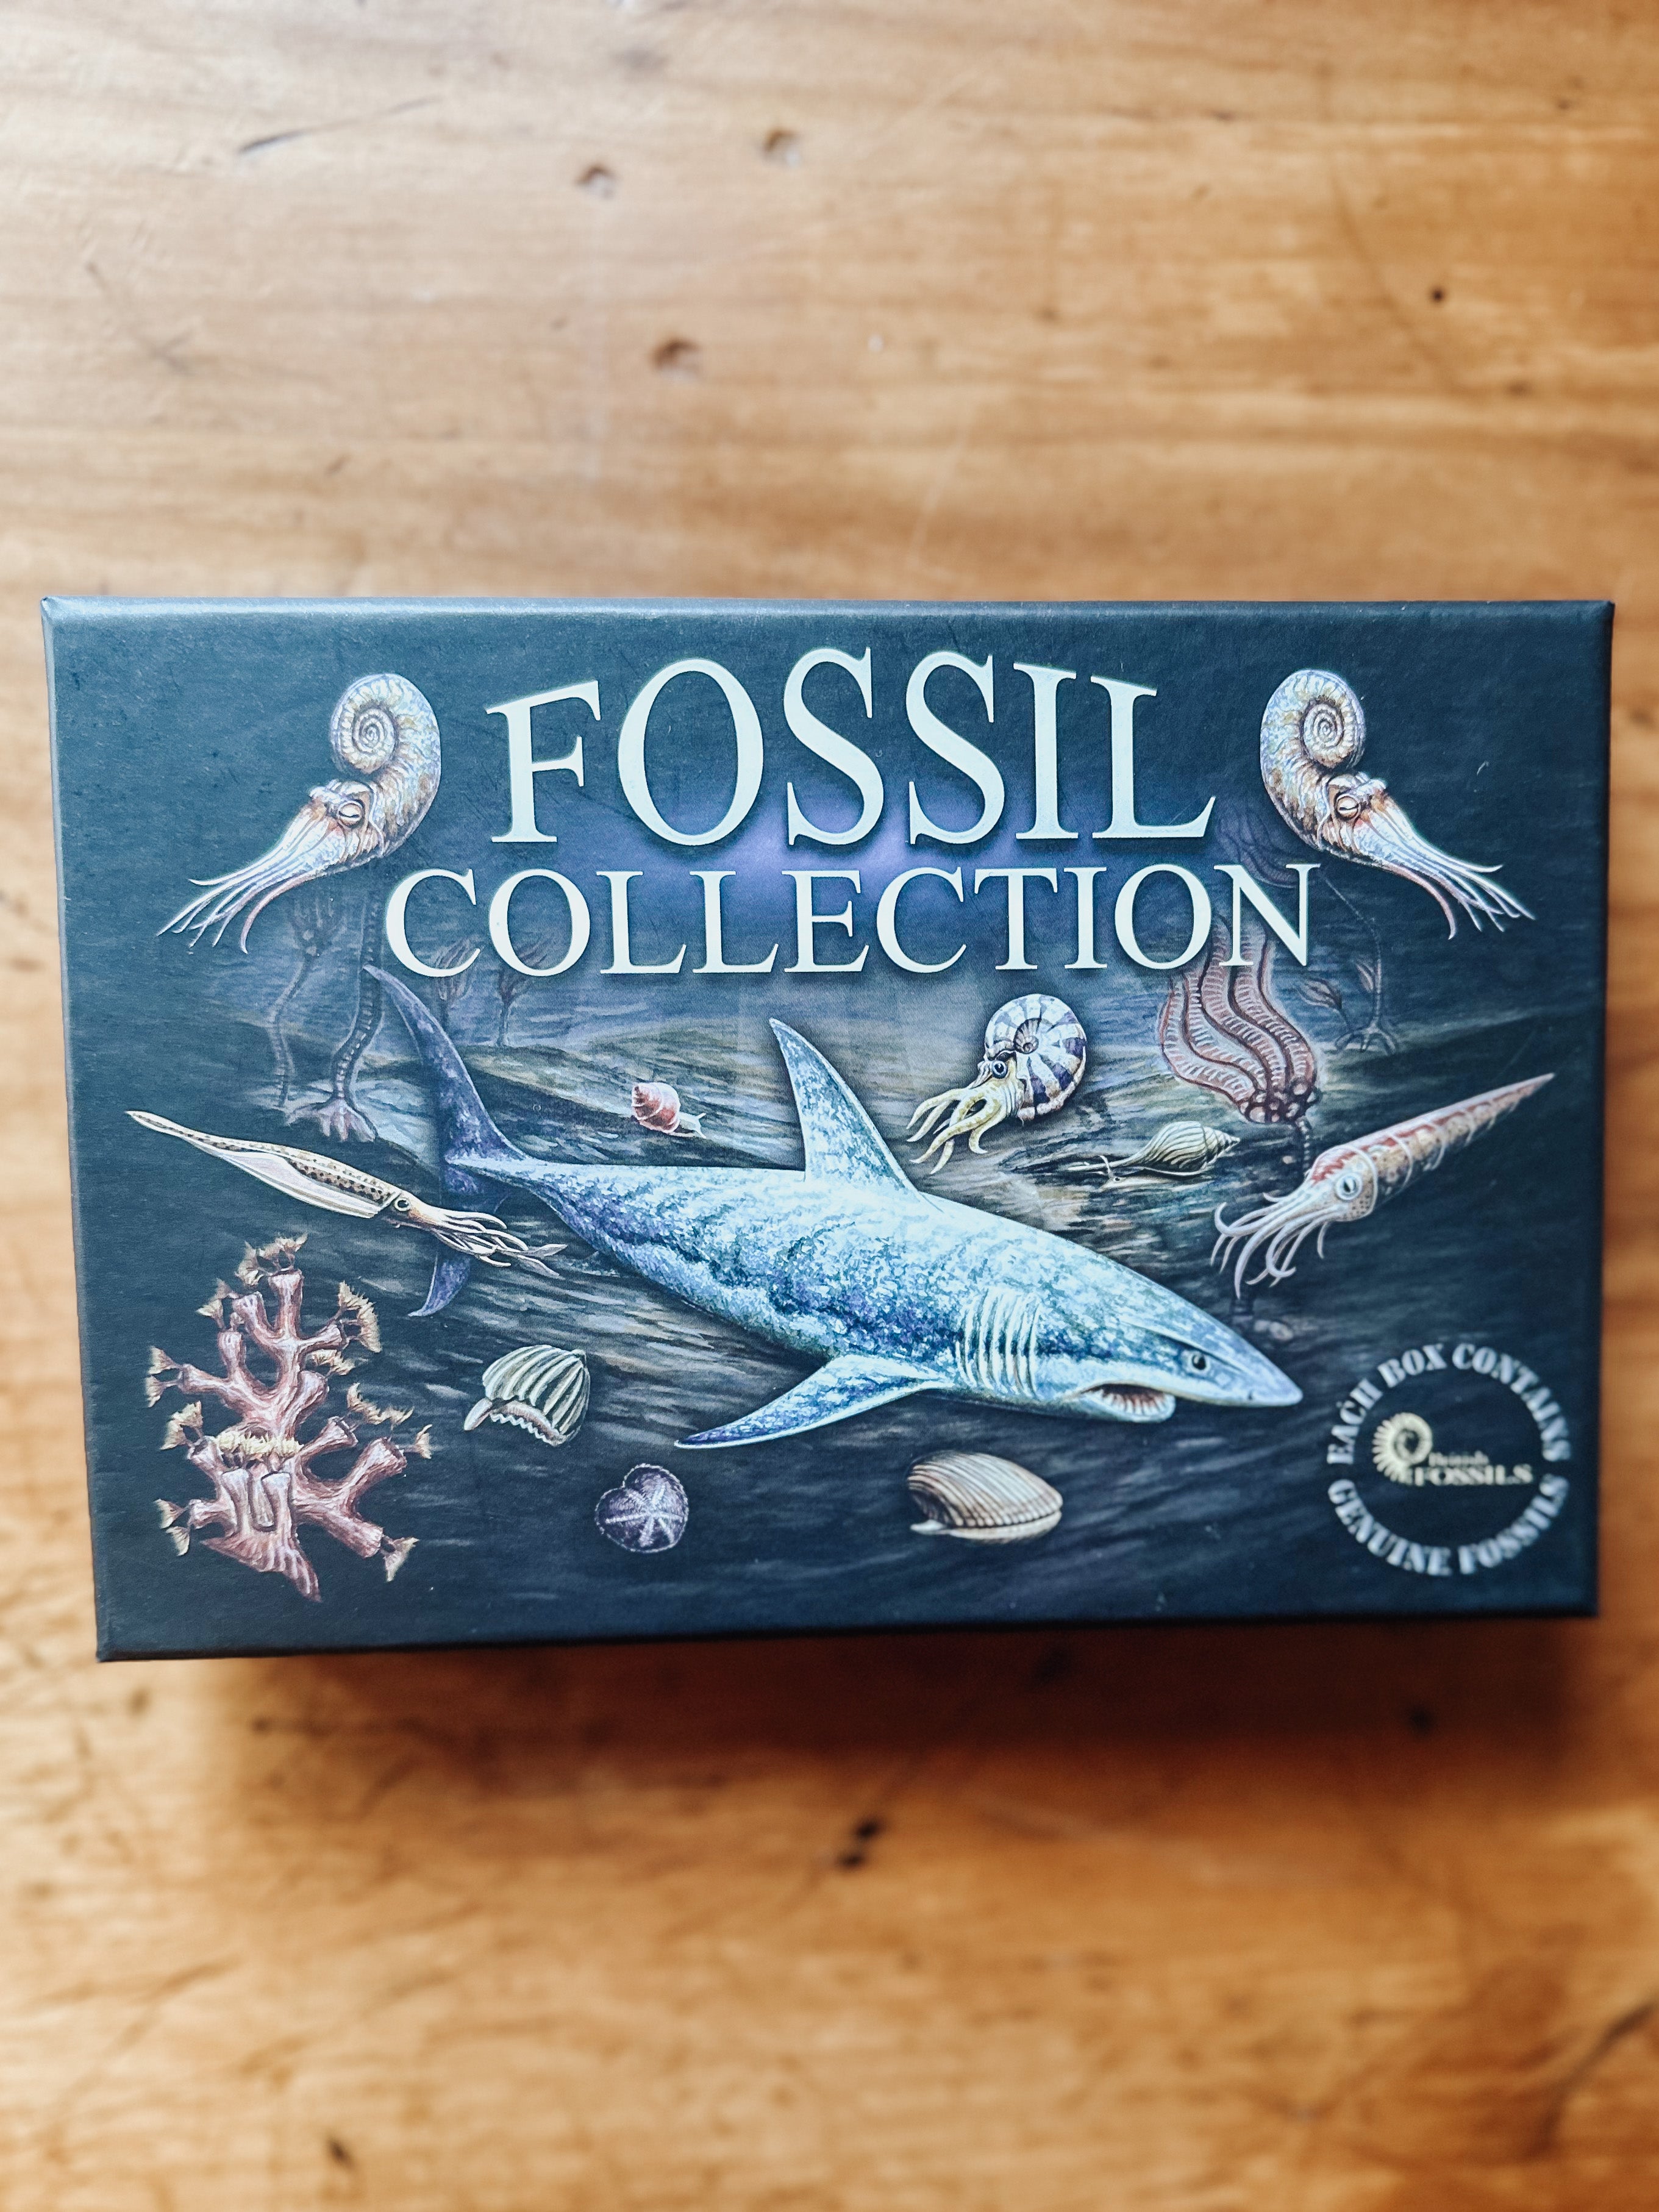 Fossil Collection Box